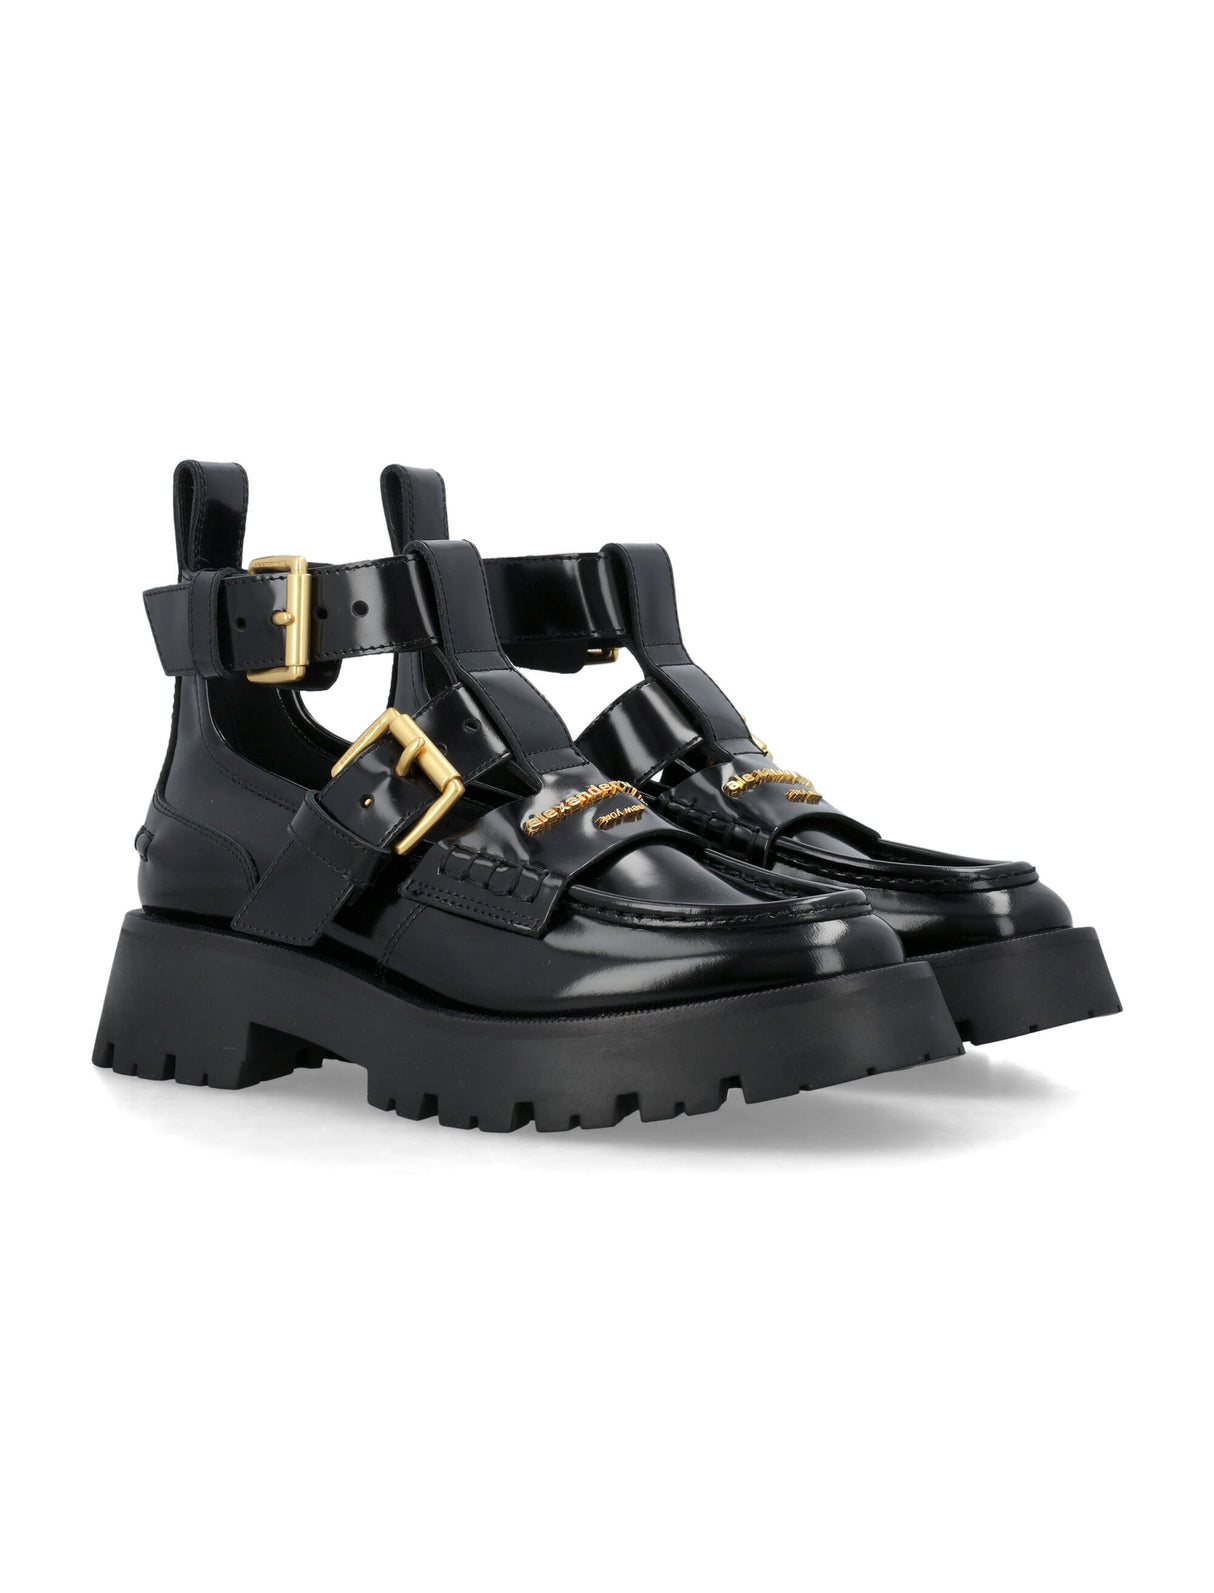 ALEXANDER WANG Black Leather Ankle Strap Boot for Women: Adjustable Straps, Gold Tone Hardware, Rubber Sole, SS24